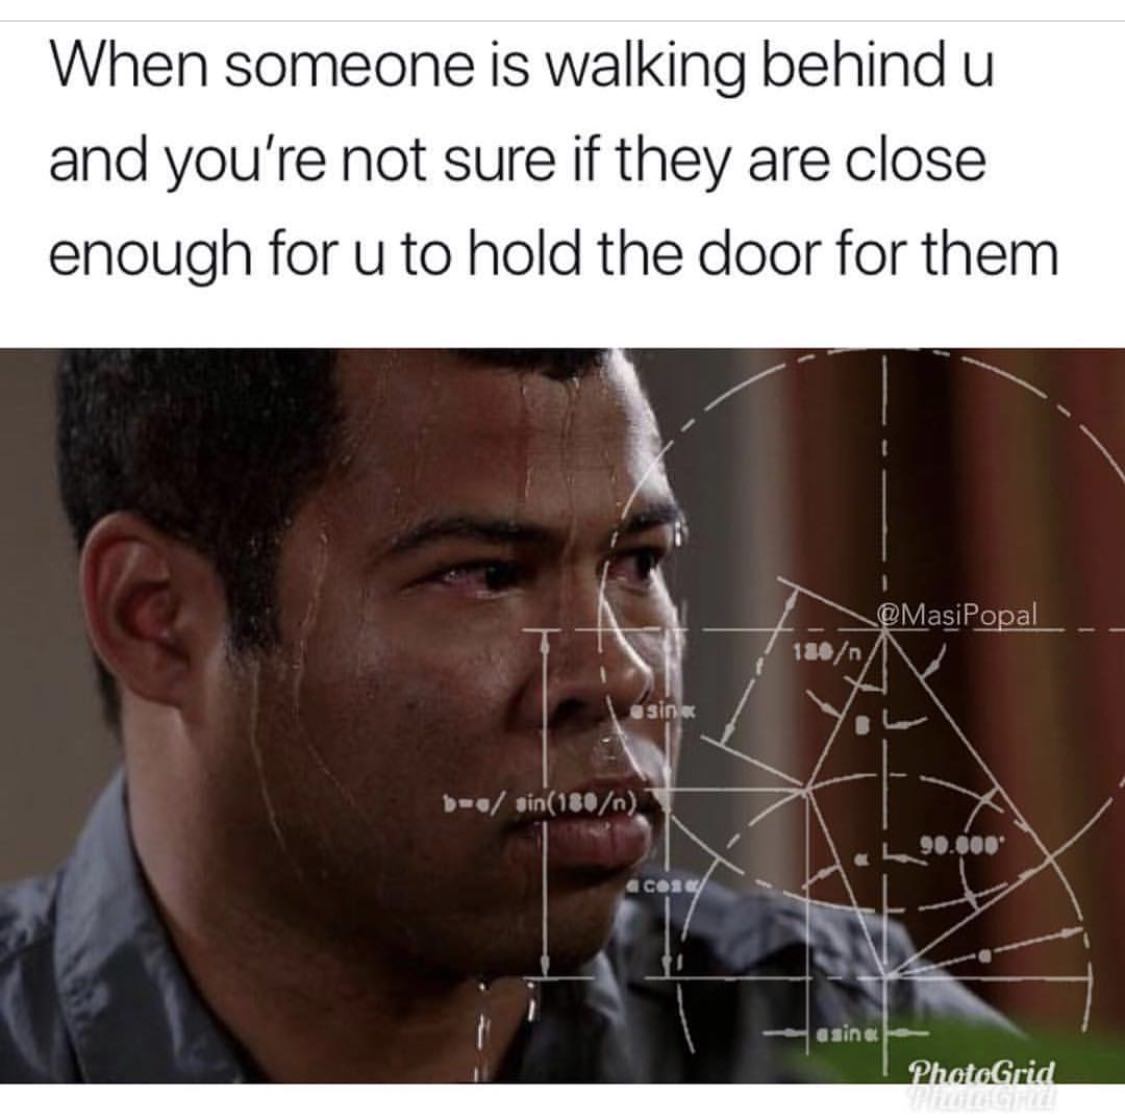 awkward memes - When someone is walking behind u and you're not sure if they are close enough for u to hold the door for them Ta b sin180n Cos asine PhotoGrid